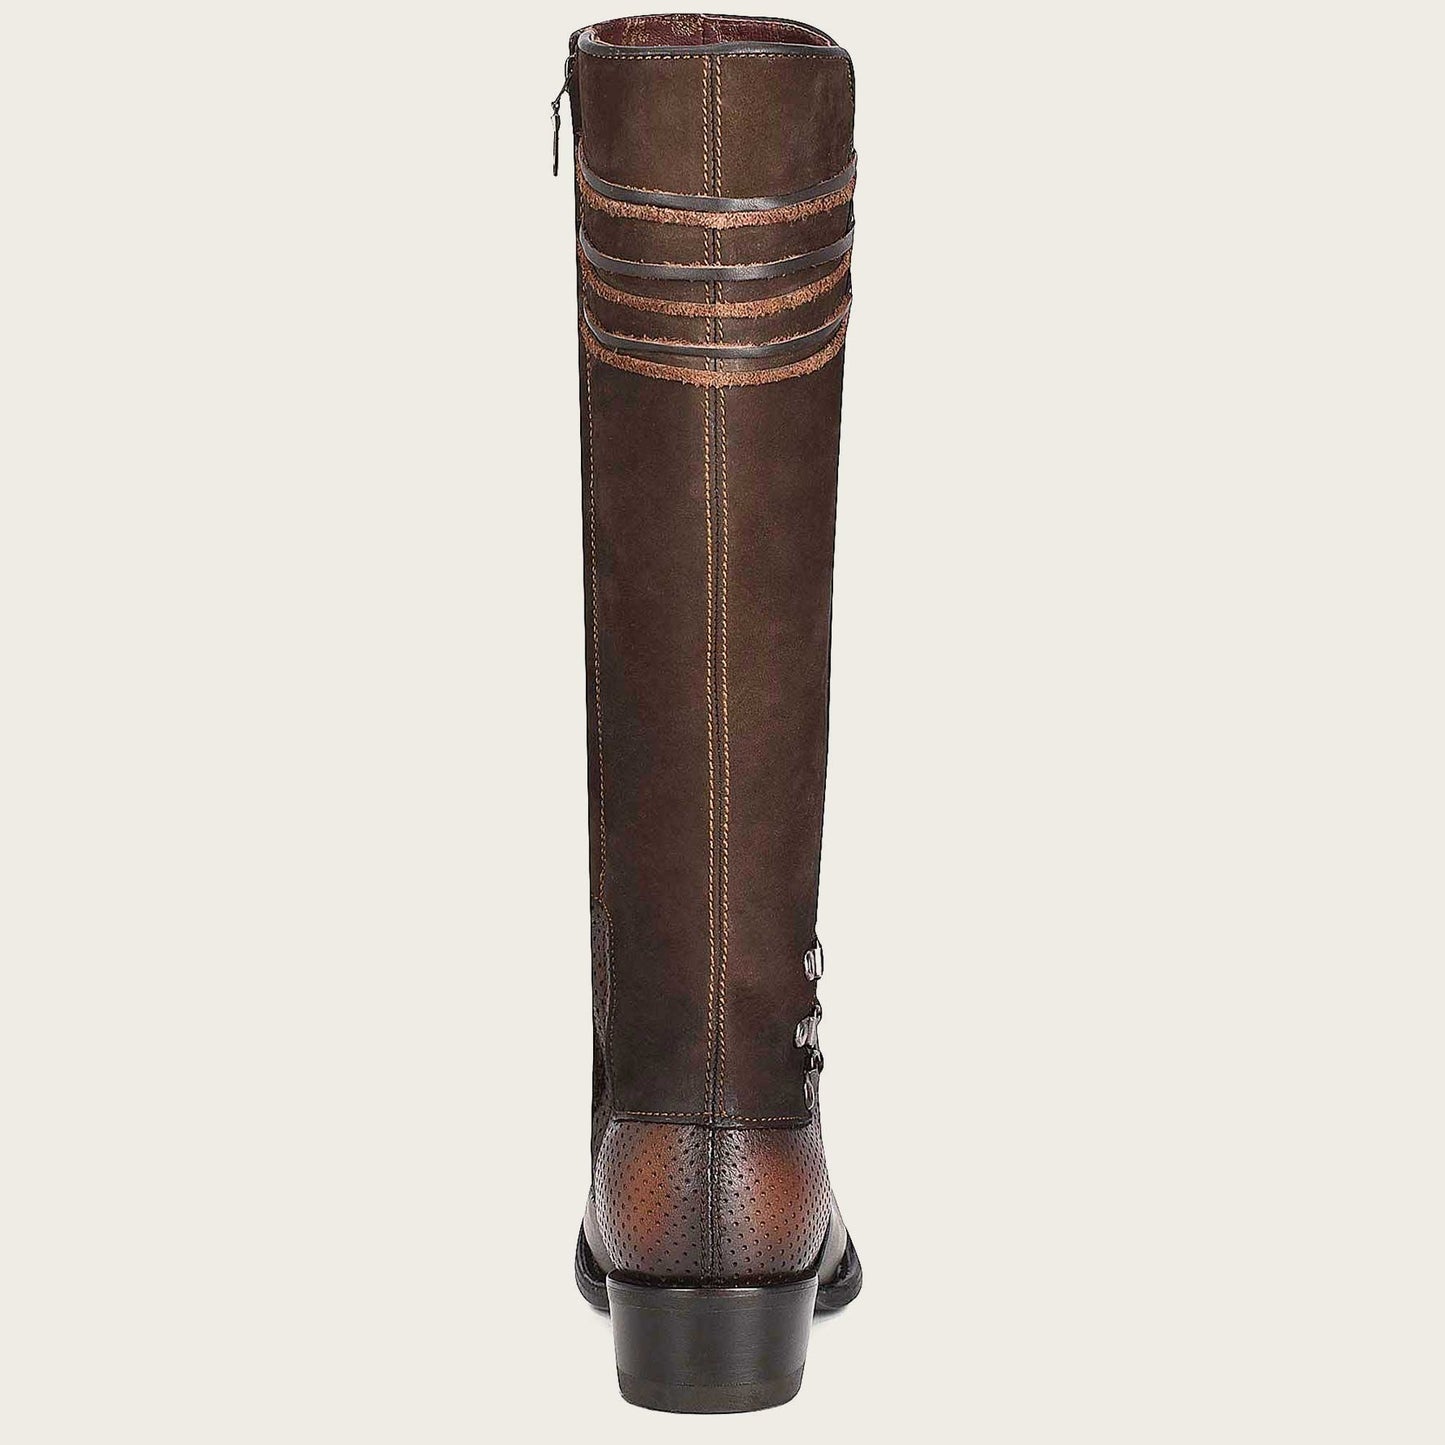 Brown tall boots